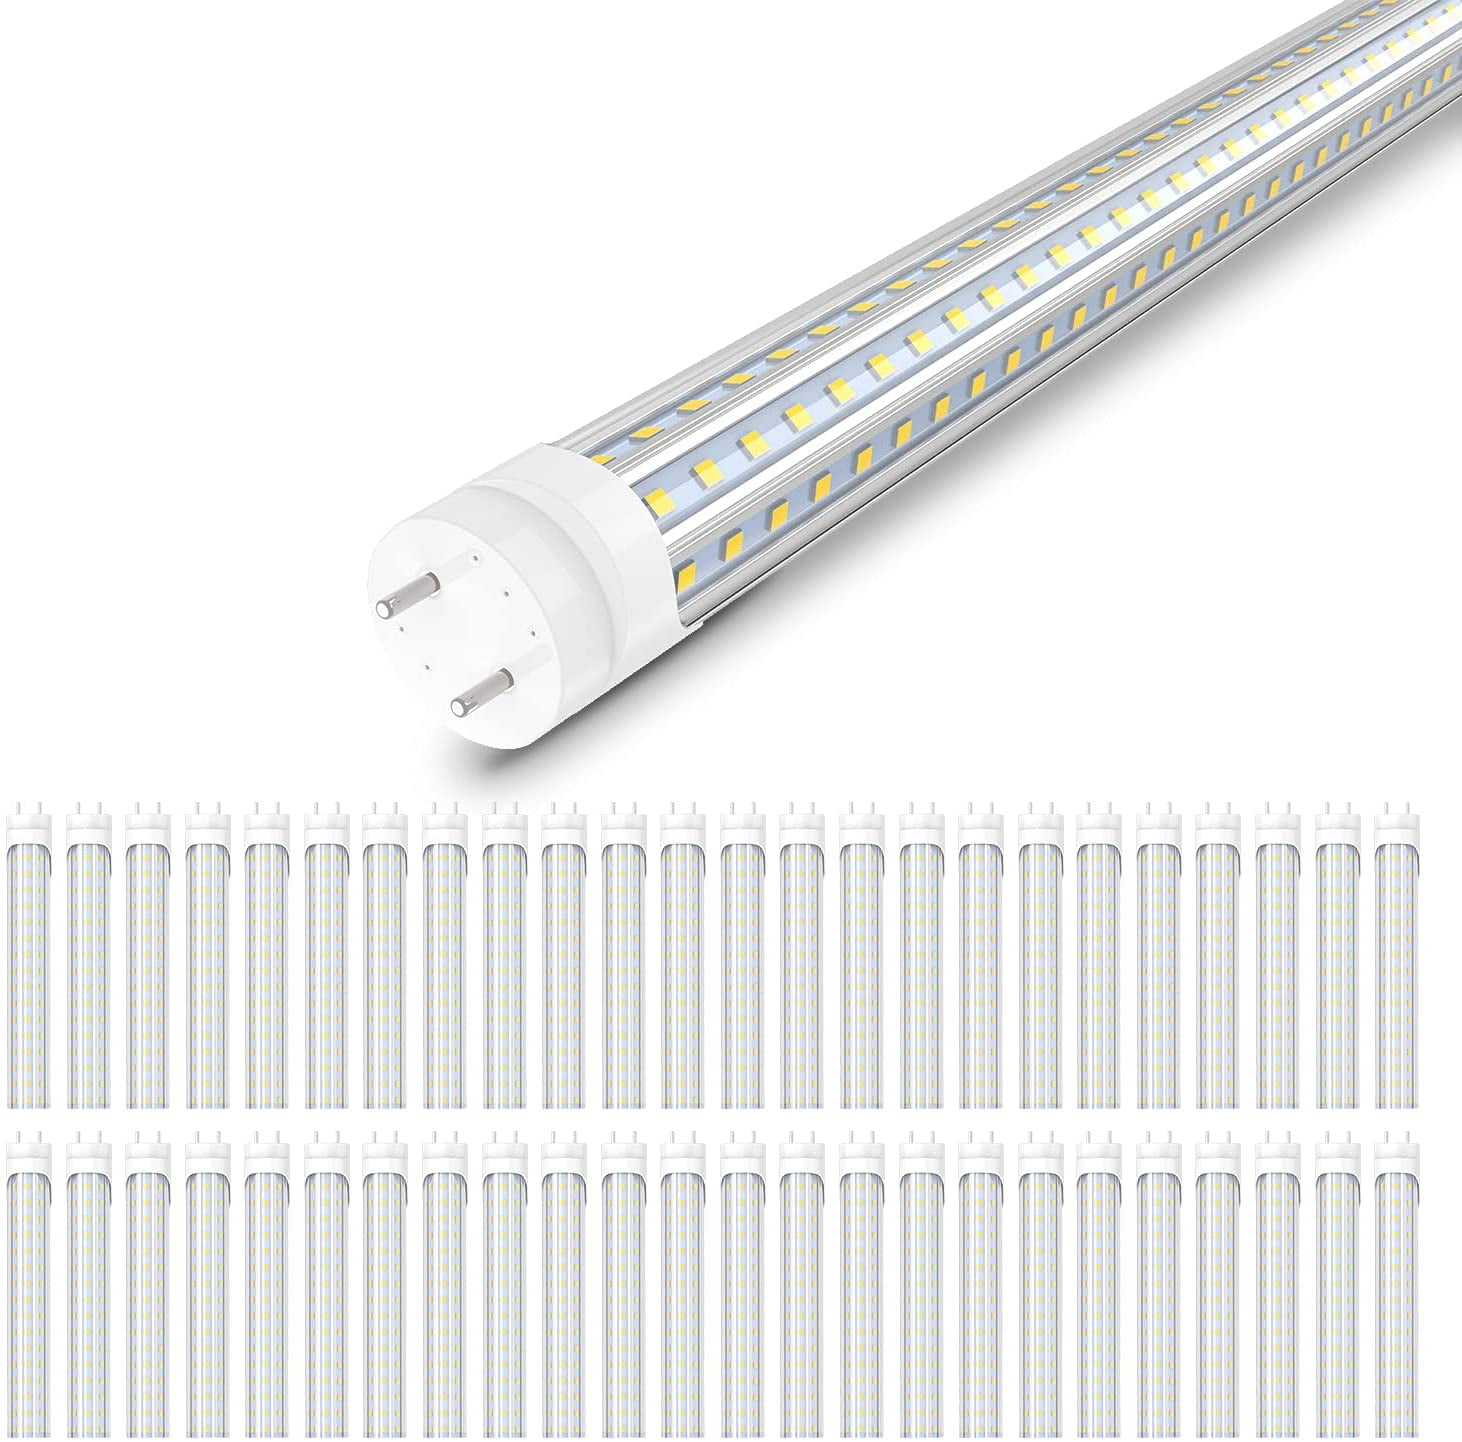 10PACK LED 4ft 36W T8 Fluorescent Tube G13 Dual-end Frosted Lens 6000K Daylight 